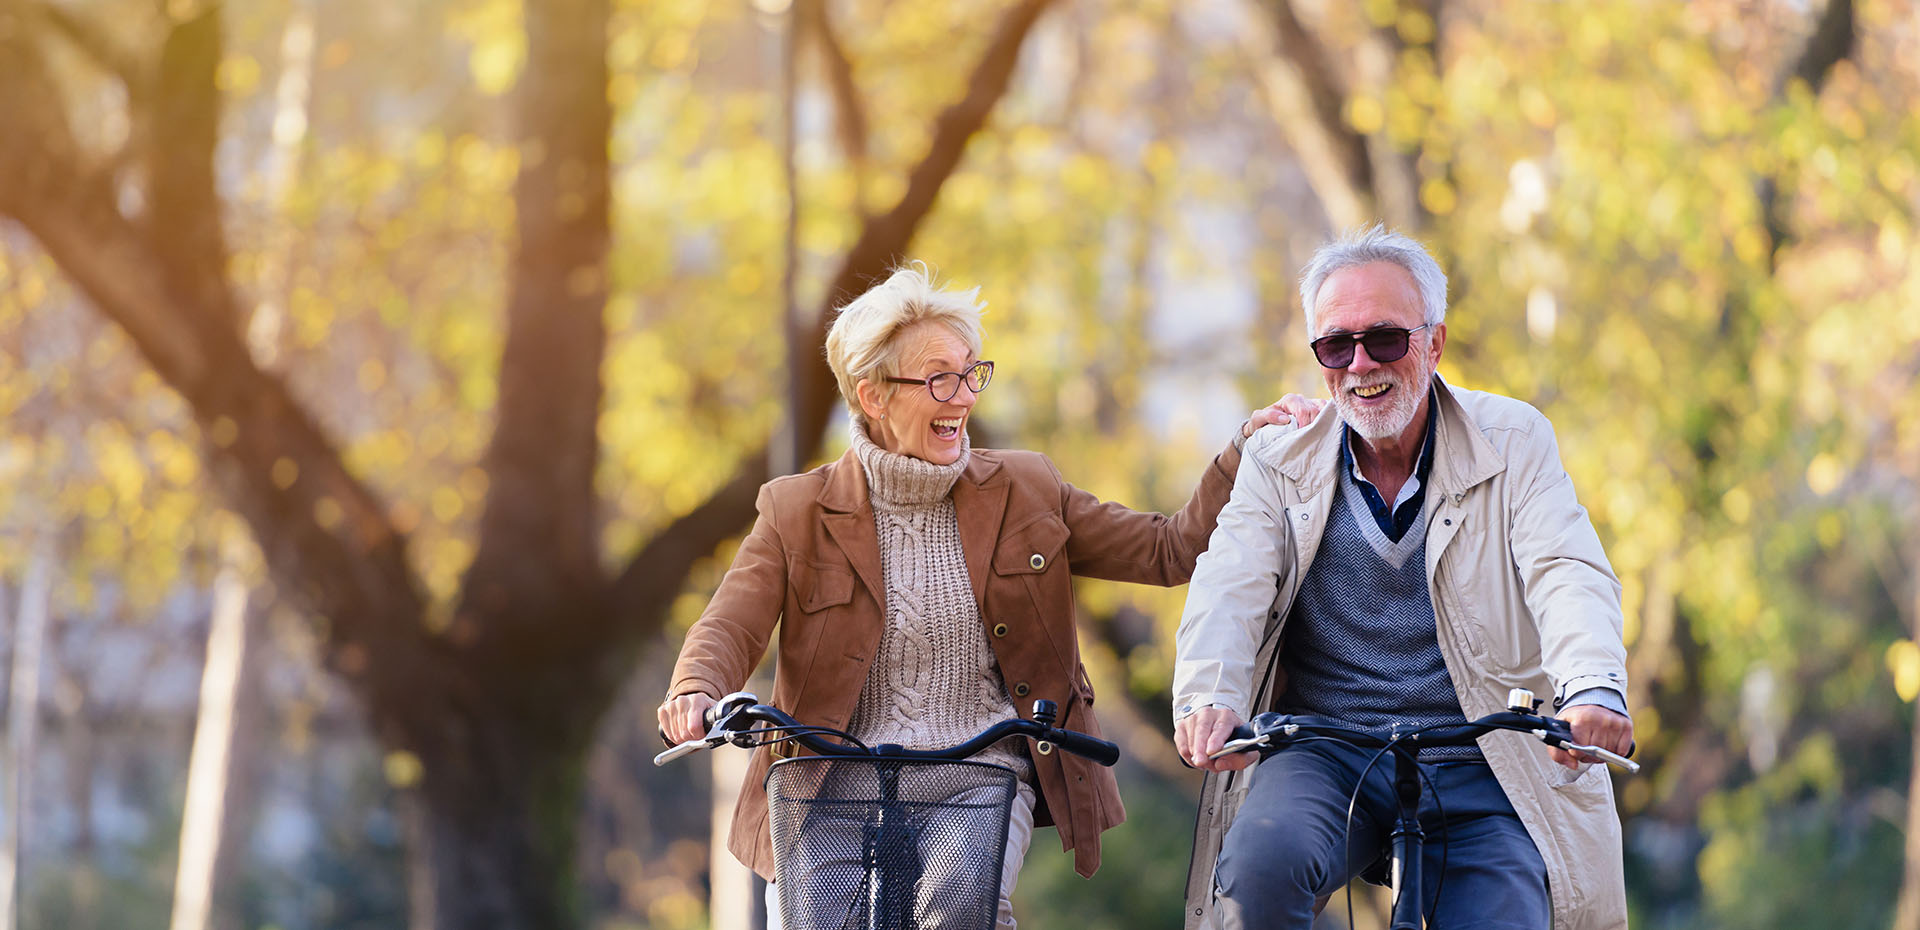 Image showing a happy older couple on bikes